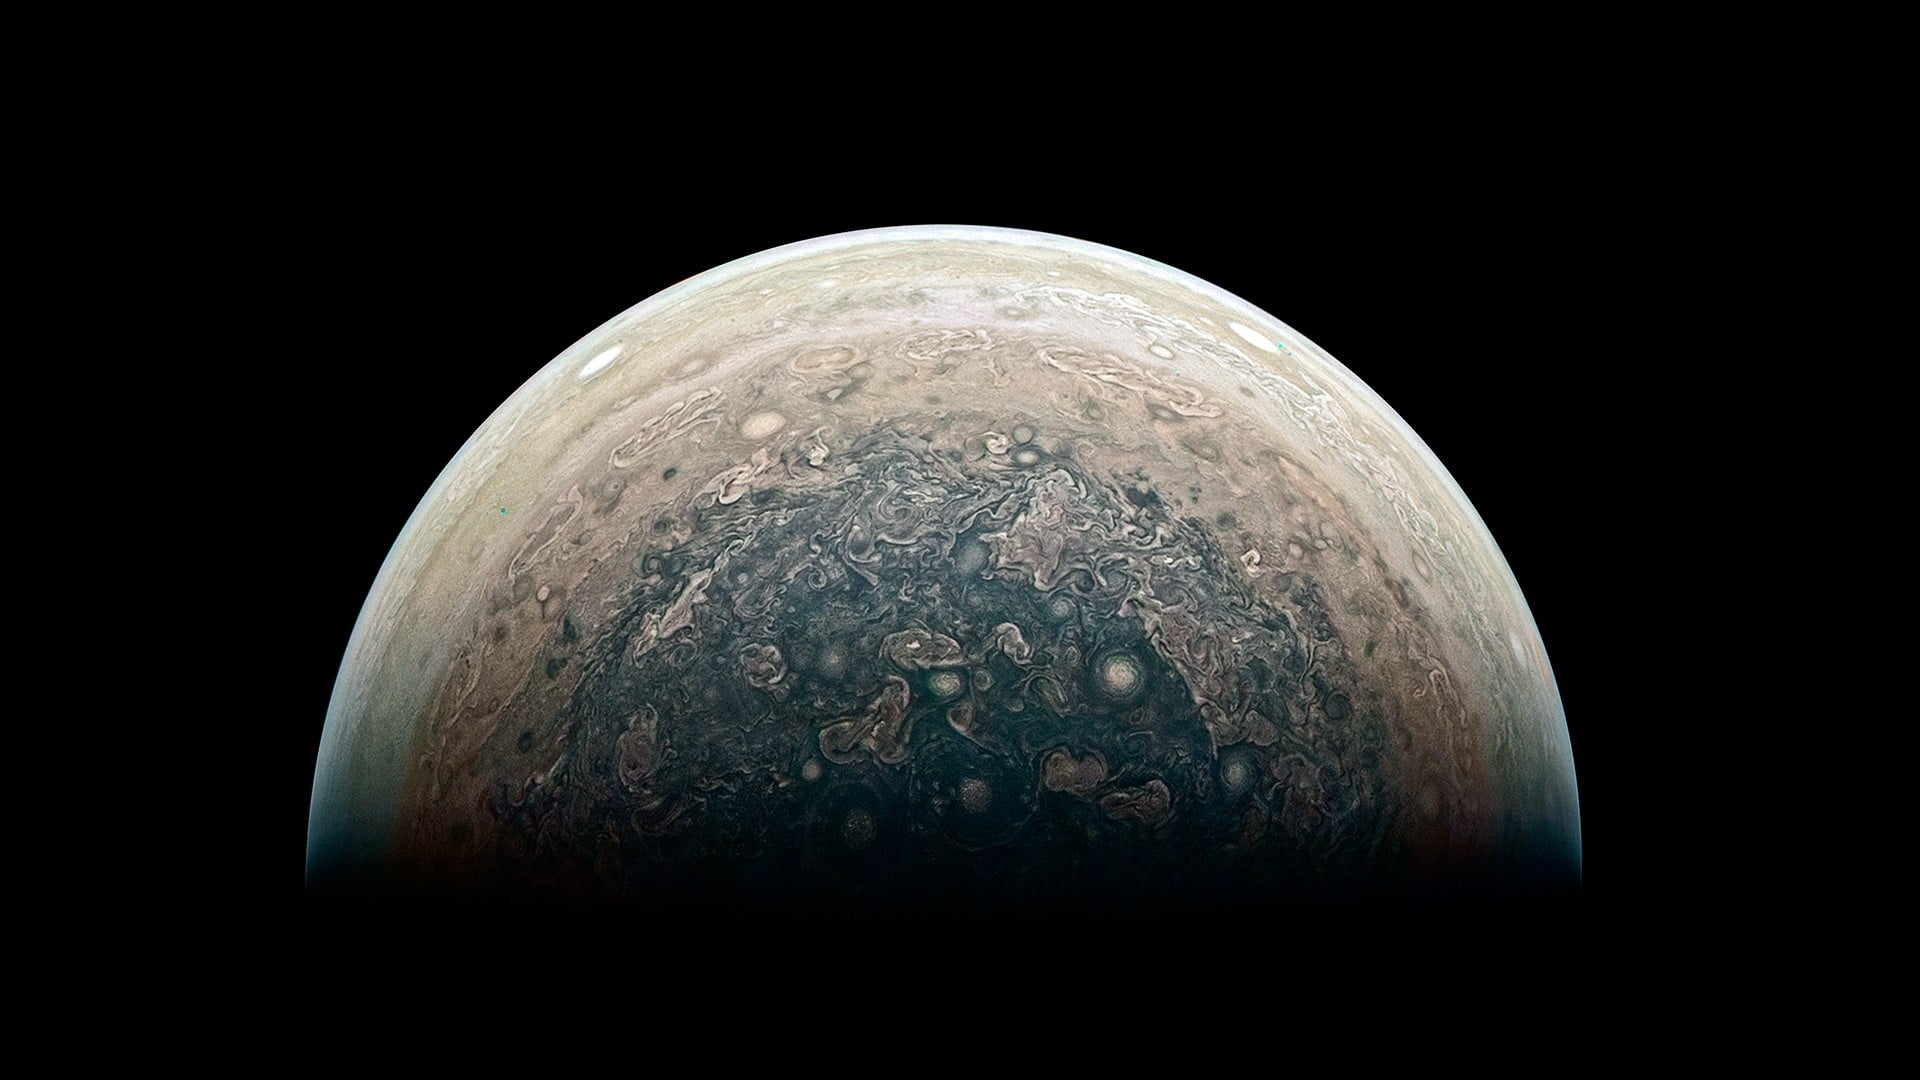 blue, brown, and gray planet, Jupiter, planet, space, NASA